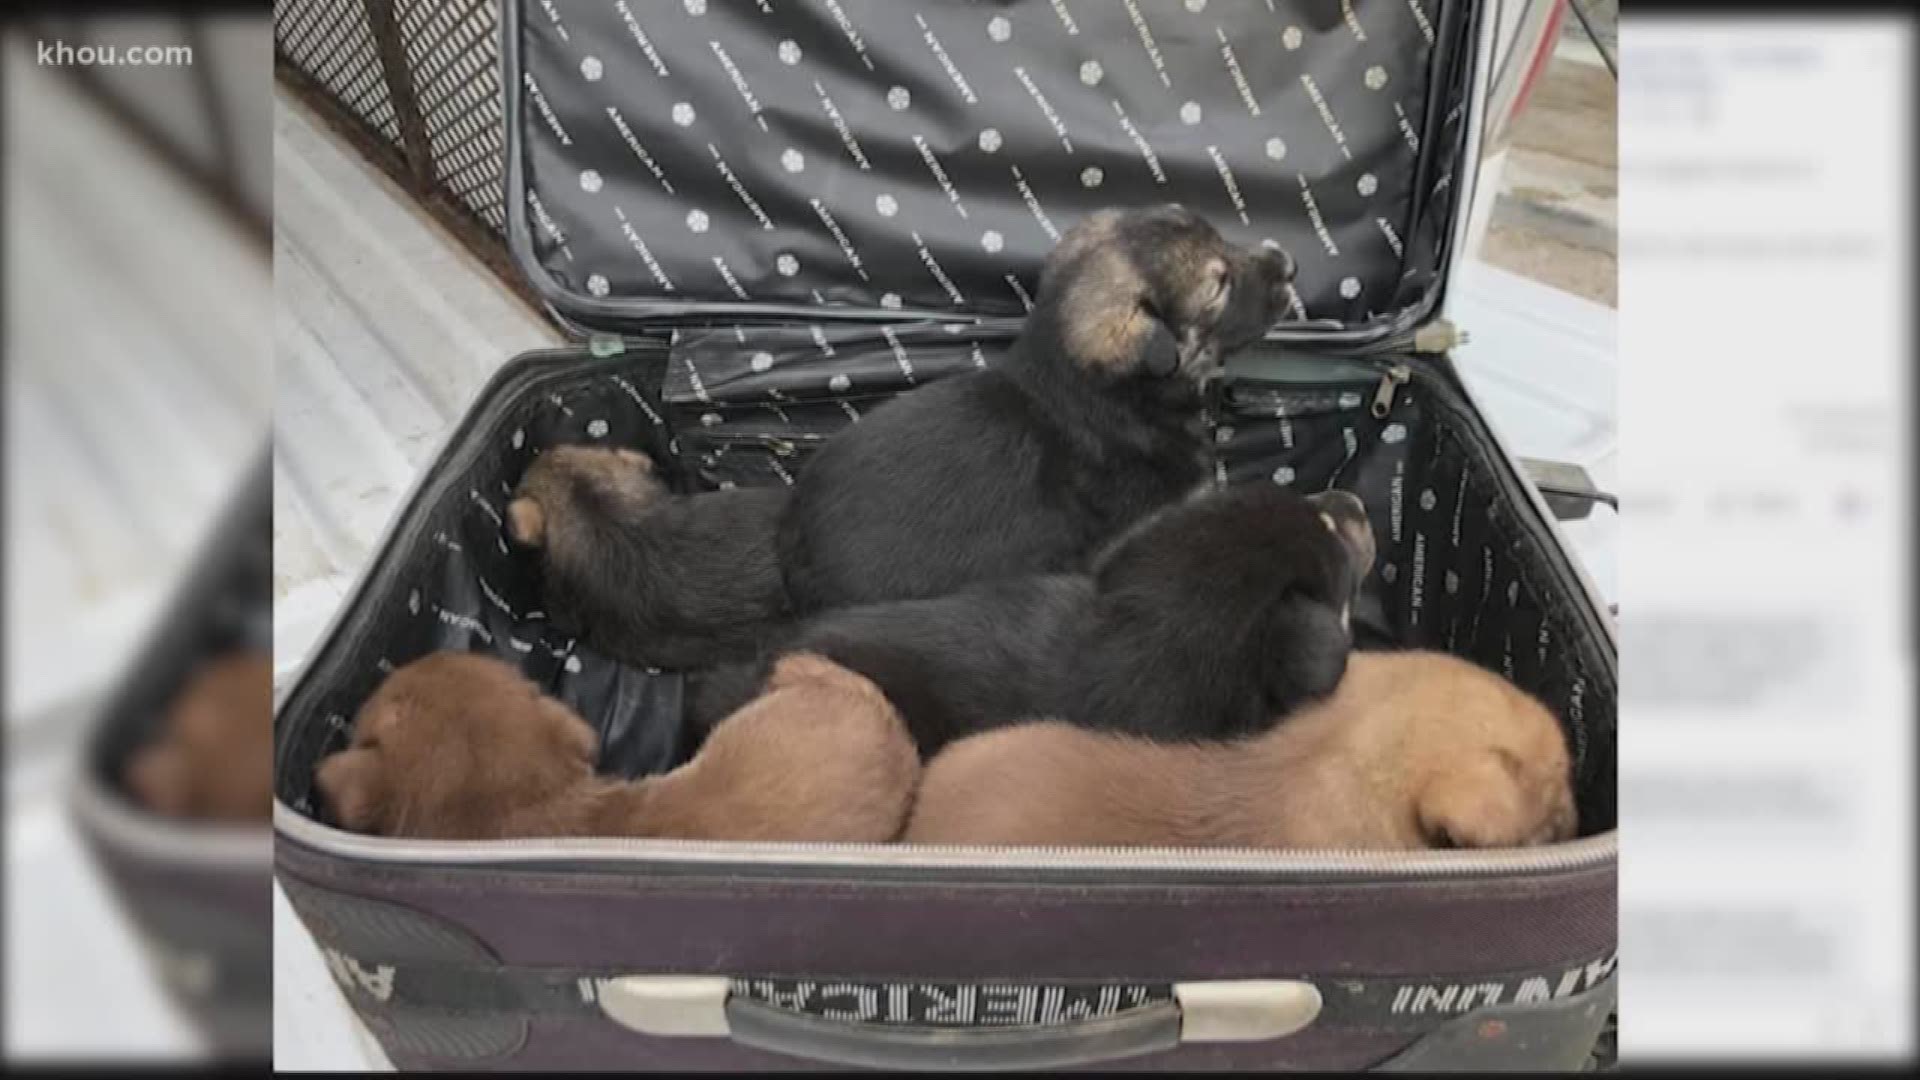 An adorable litter of puppies was found abandoned inside an open suitcase at a Fort Bend County park Thursday morning.